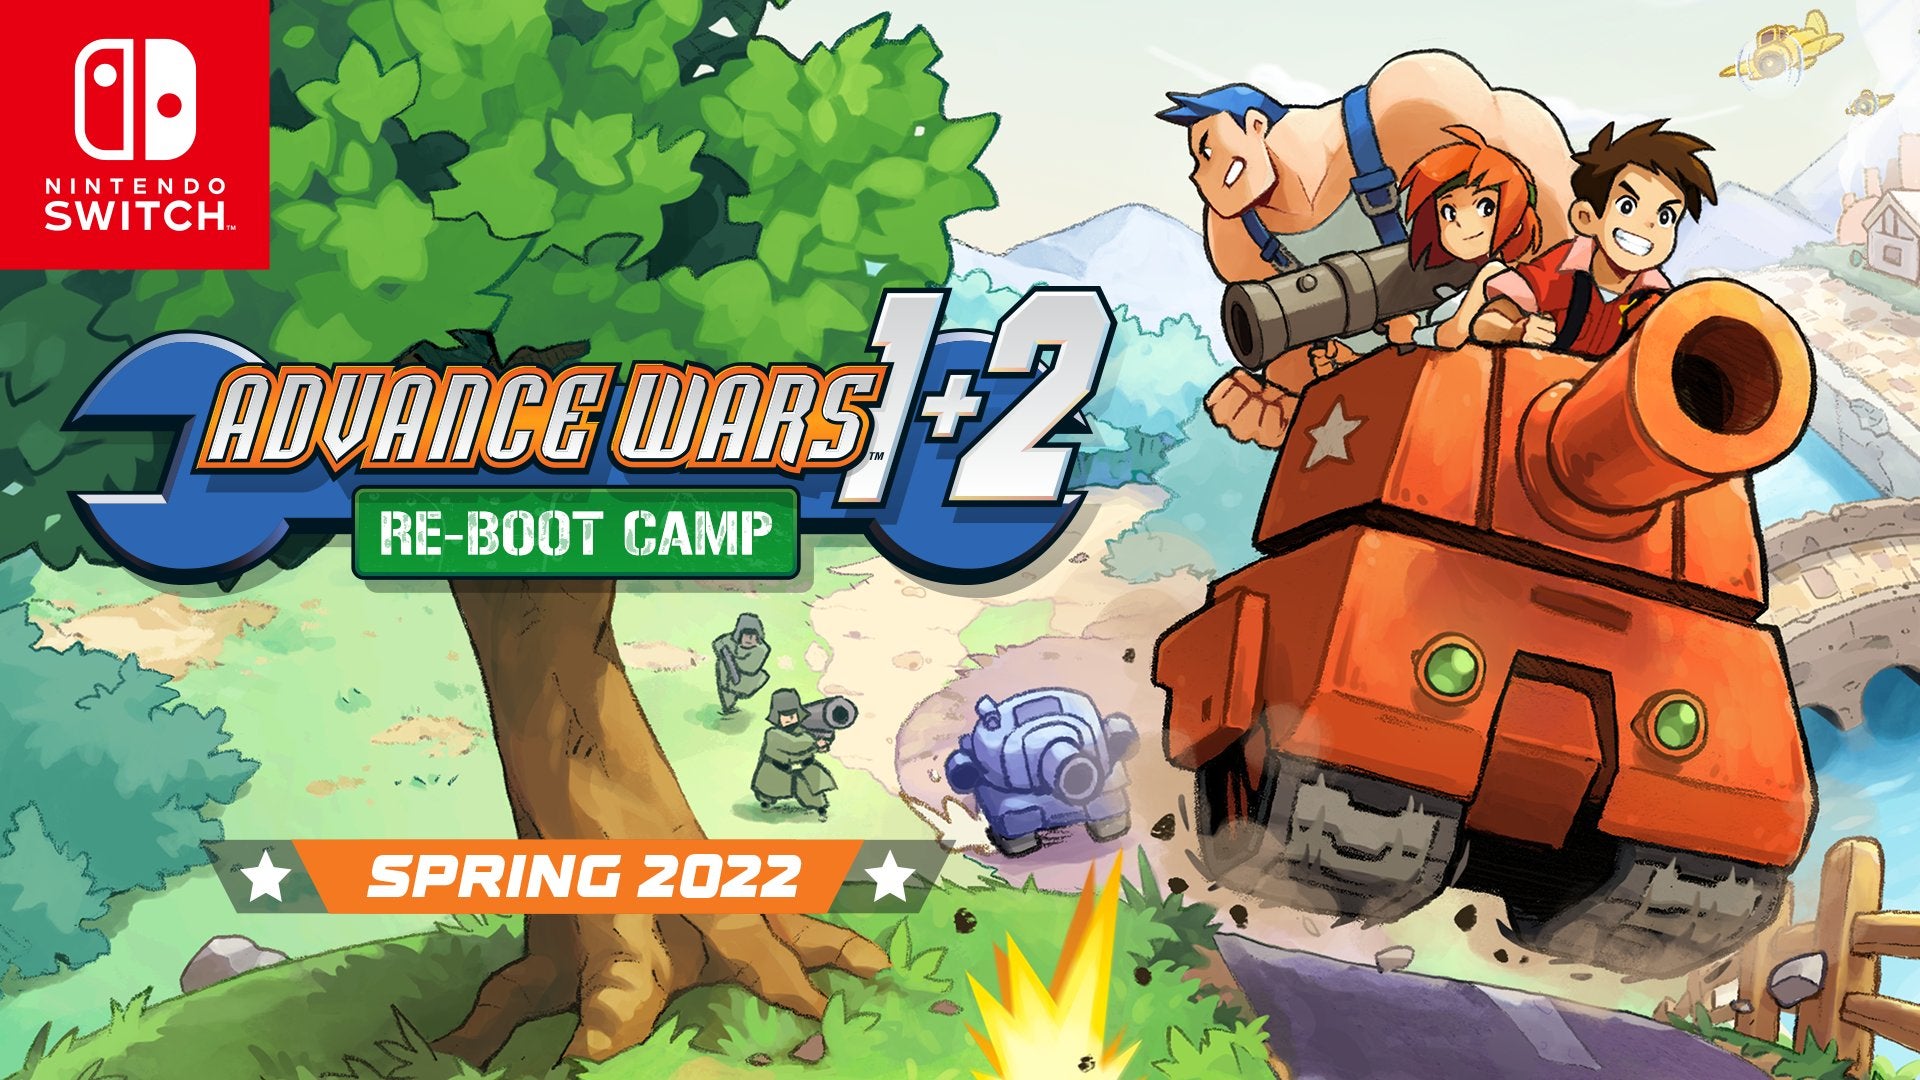 Image for Advance Wars 1+2 Re-Boot Camp delayed to spring 2022